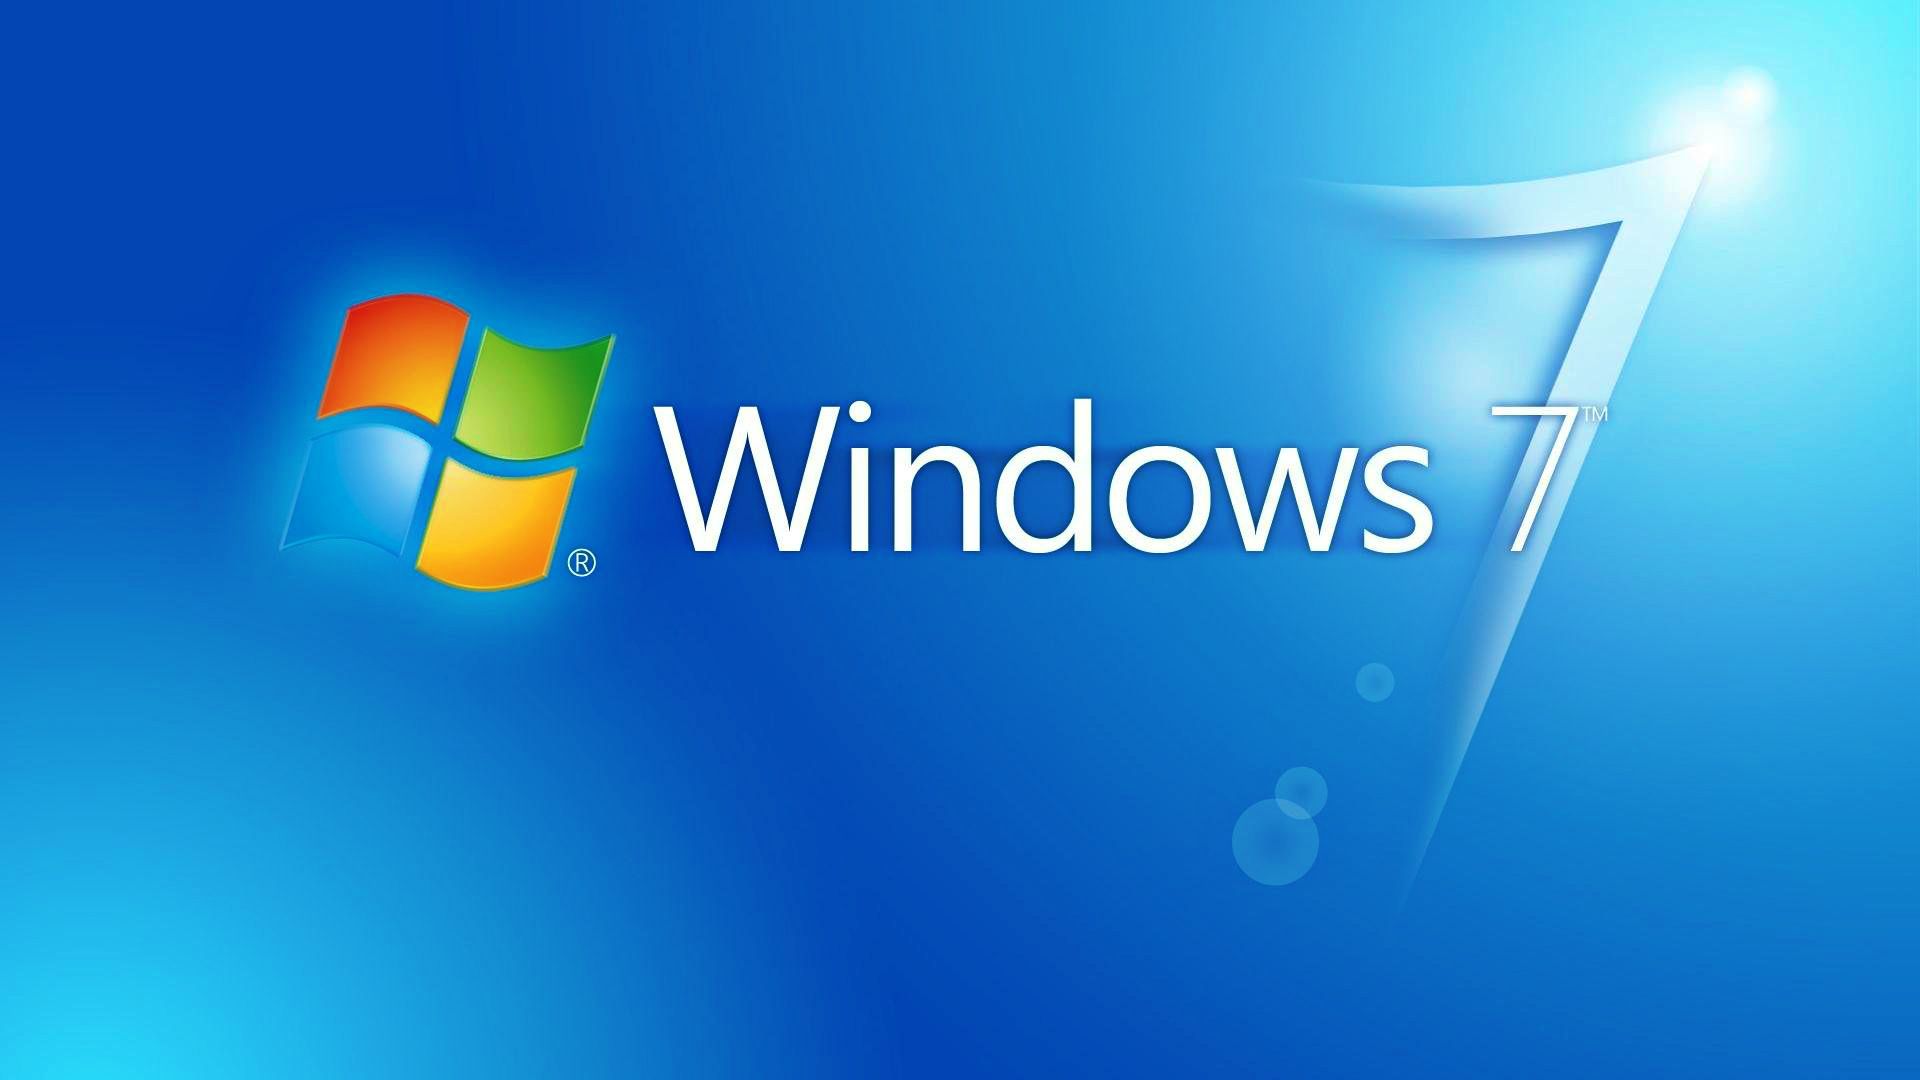 Free Win 7 Wallpapers